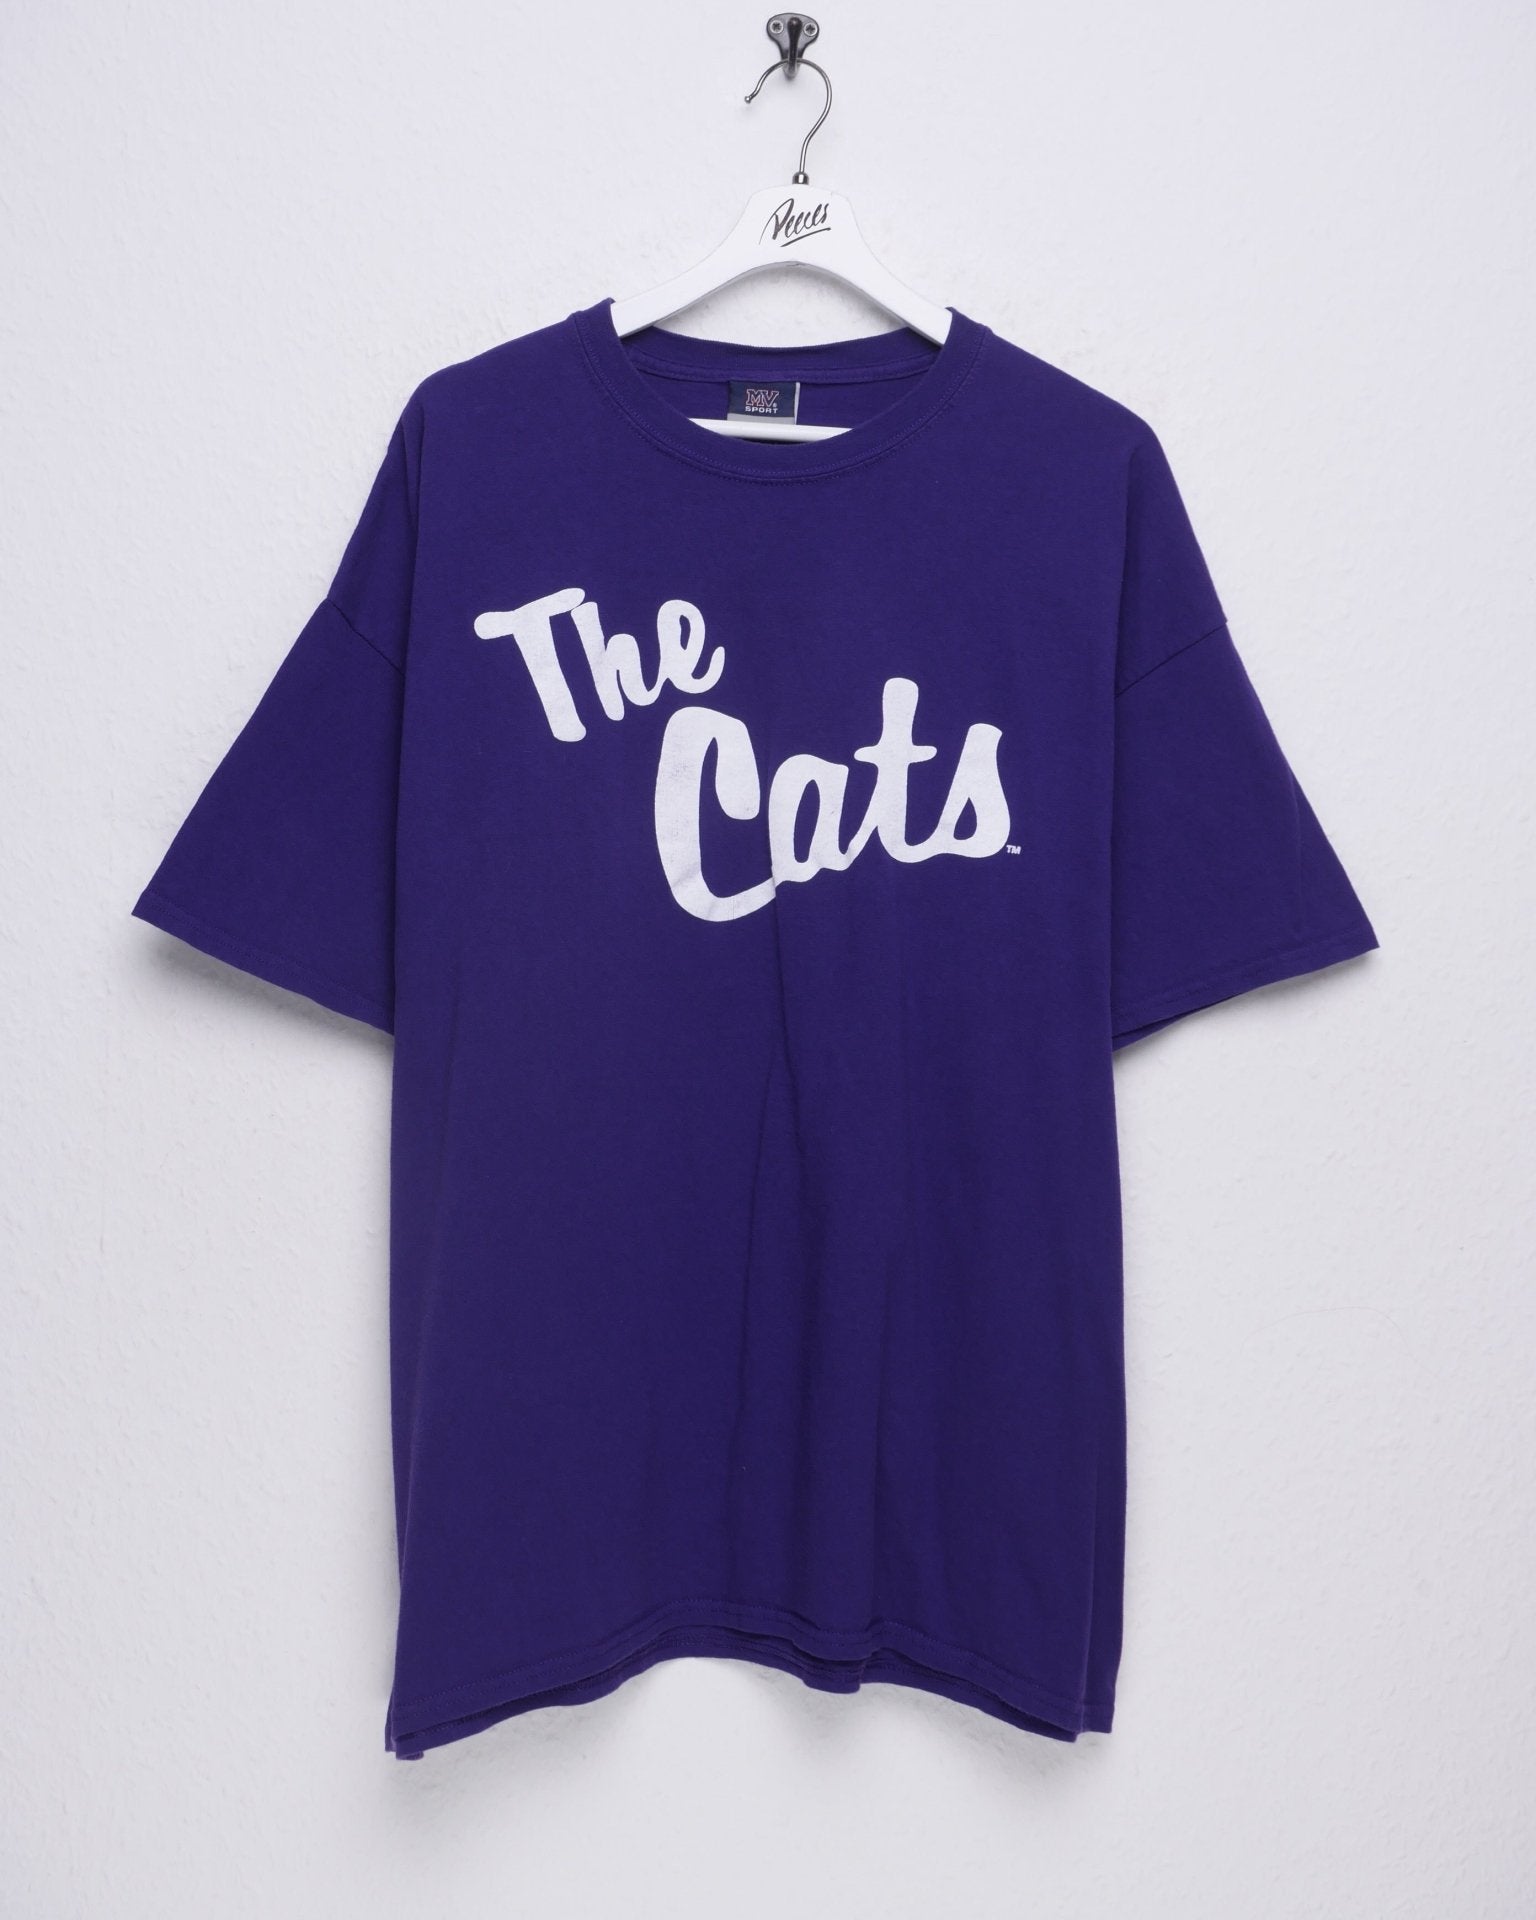 The Cats printed Spellout Vintage Shirt - Peeces